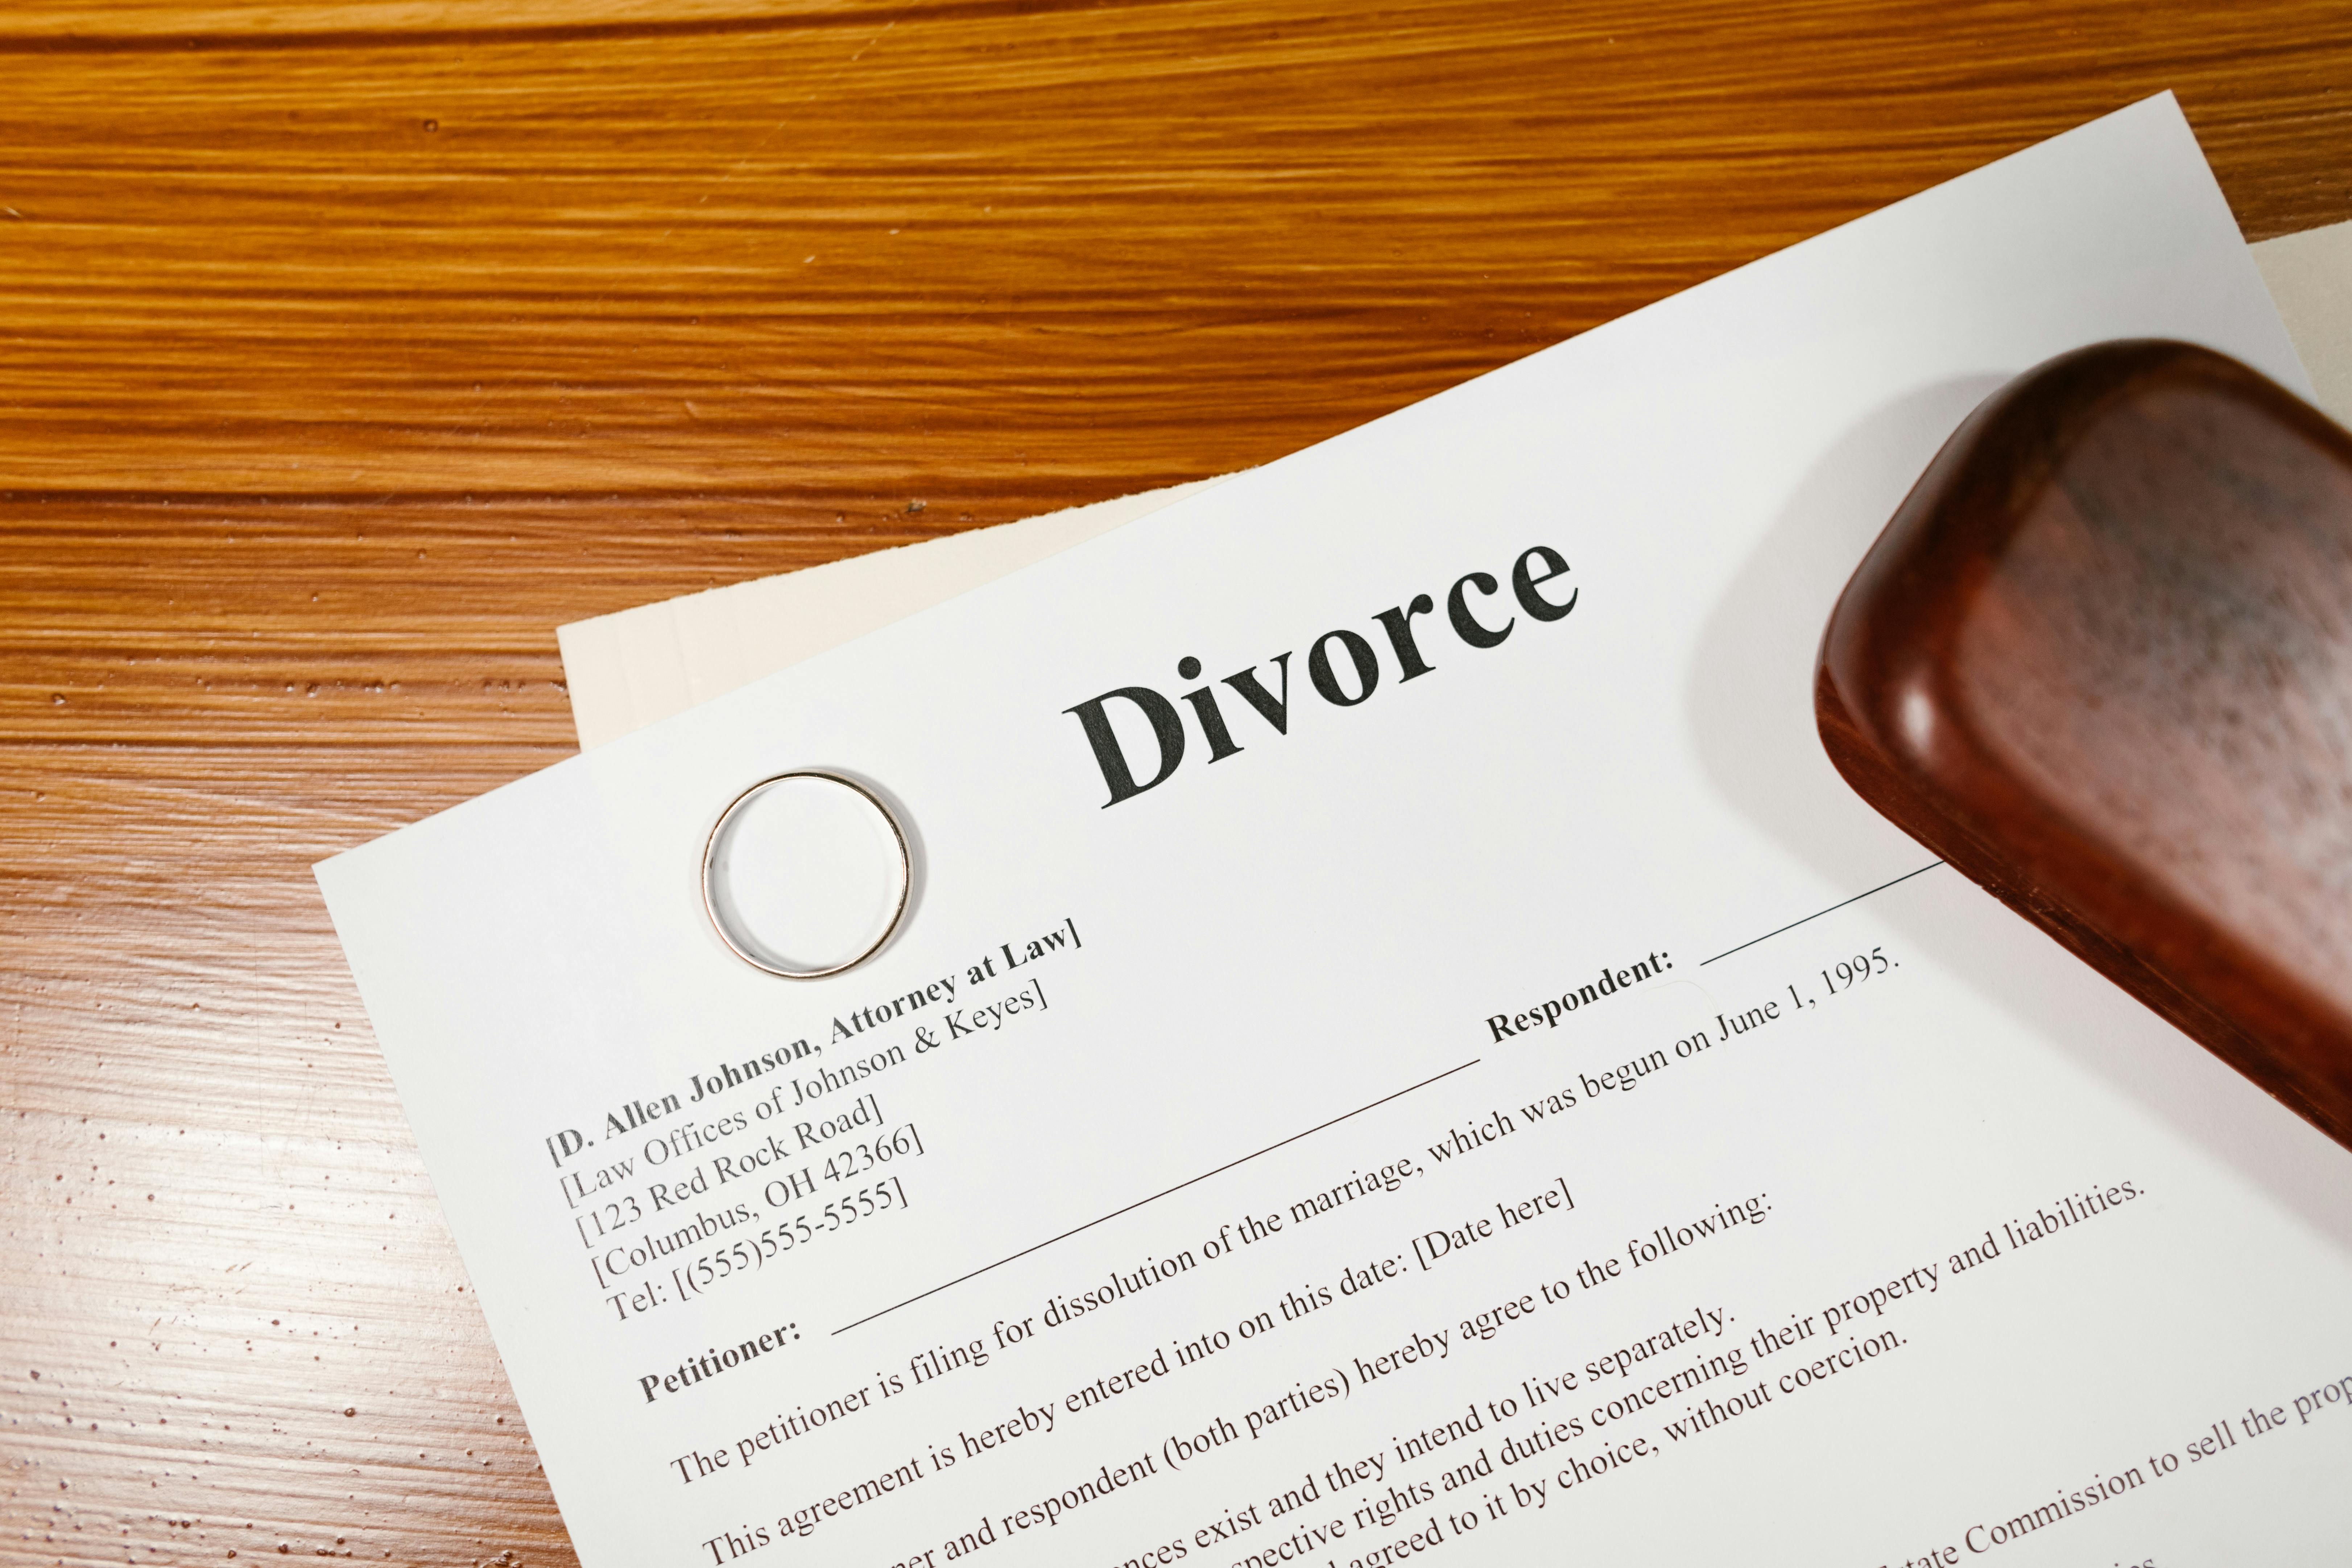 Divorce papers and a ring | Source: Pexels